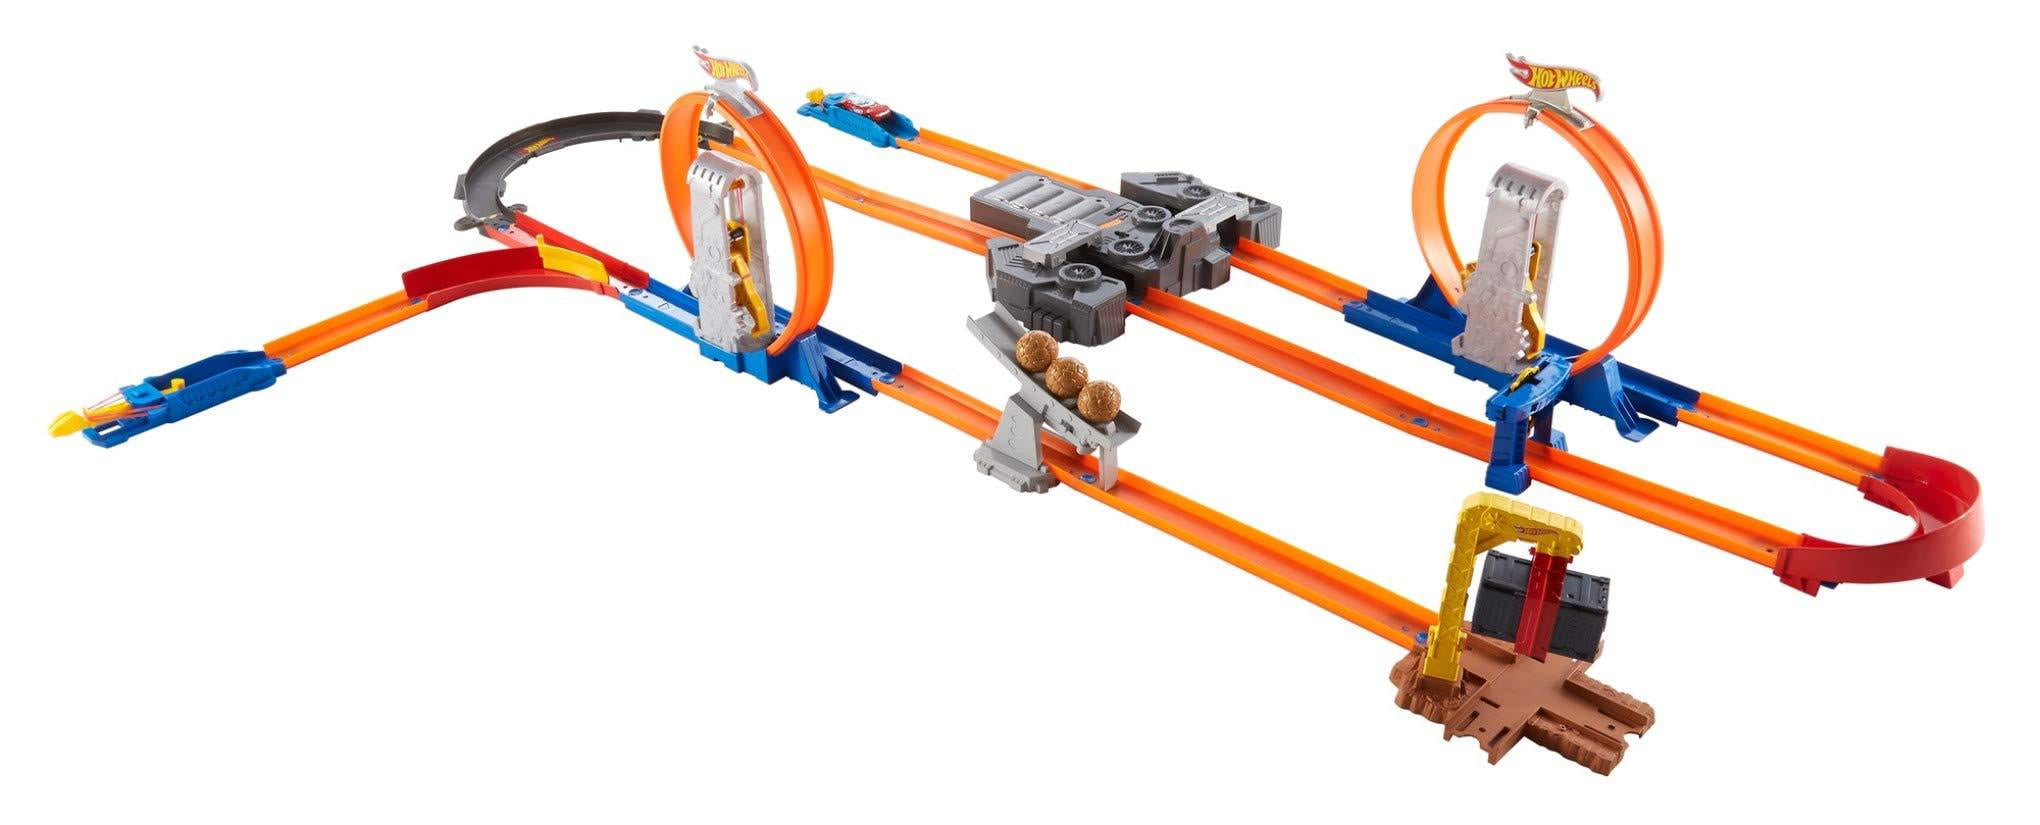 Hot Wheels Track Builder Total Turbo Takeover Track Set Die Cast Car Playset Toy